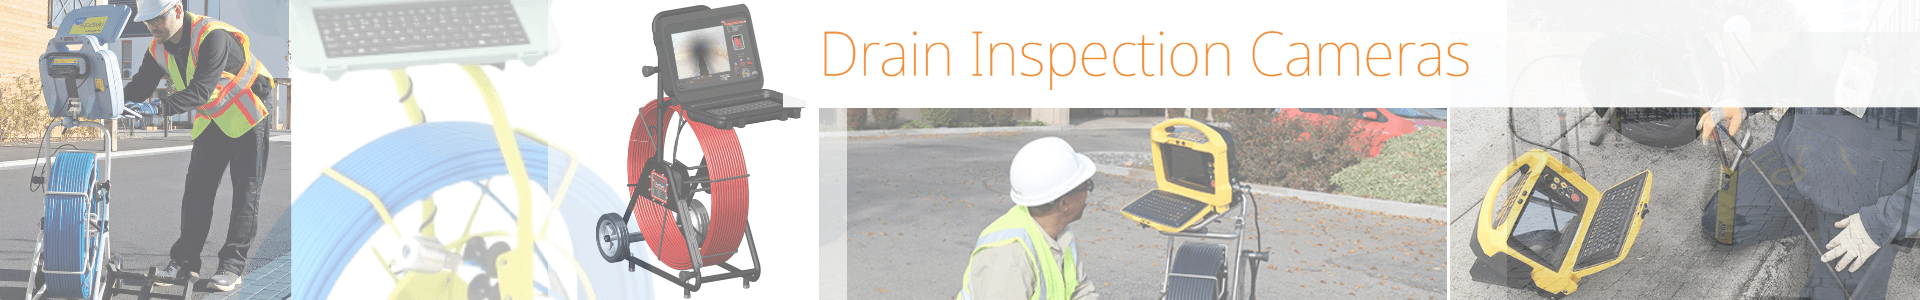 Drain and Inspection Cameras